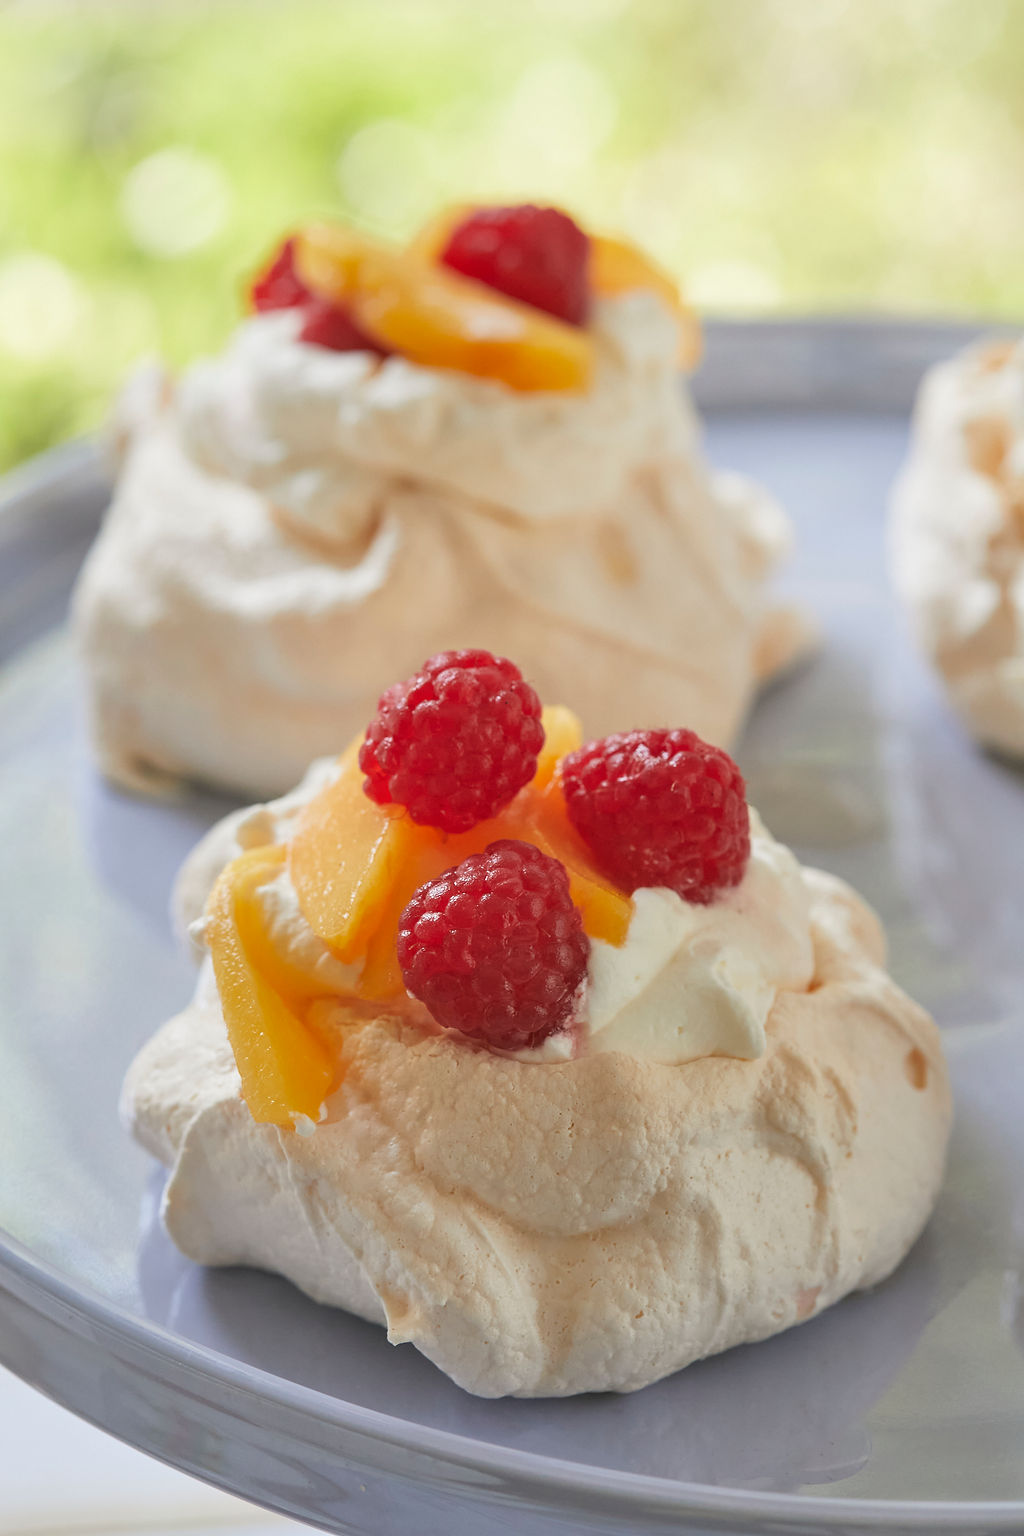 A perfect little meringue, topped with fresh cream and fruit.